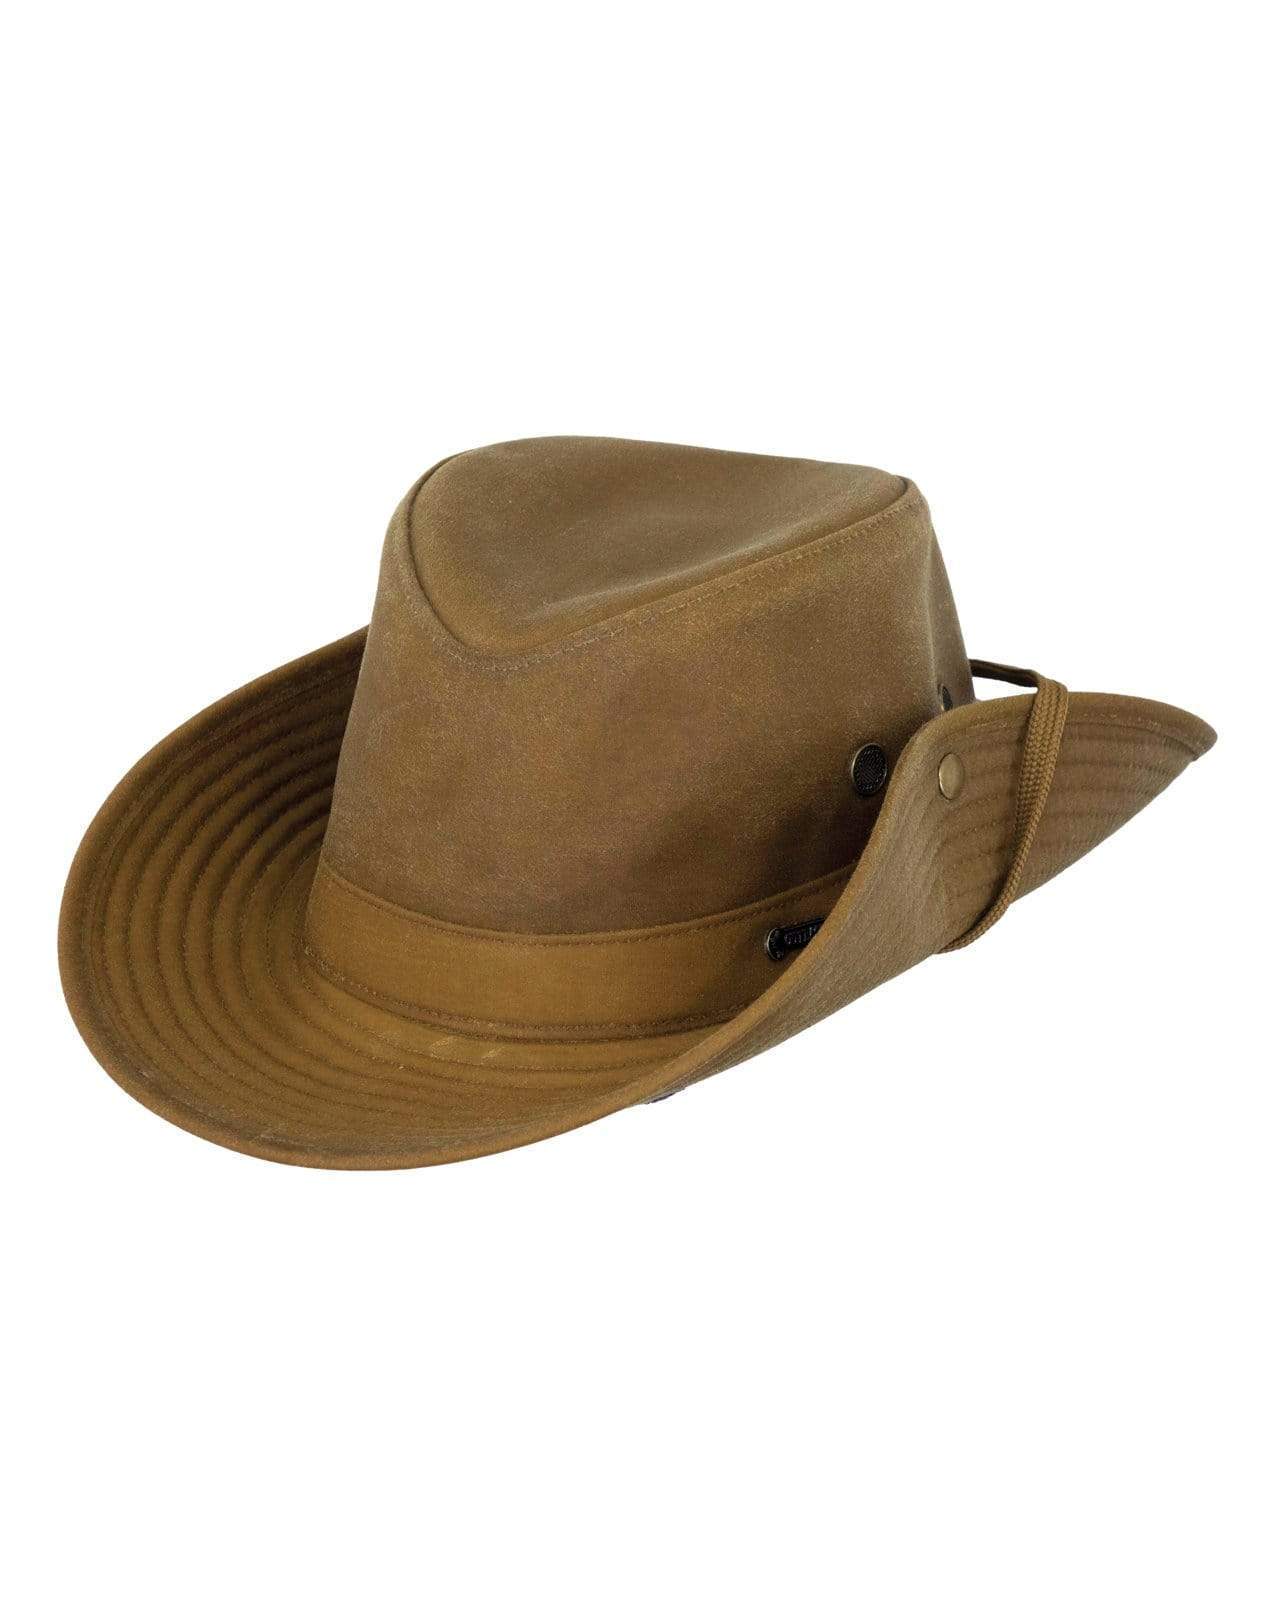 Outback Trading Company River Guide Hats